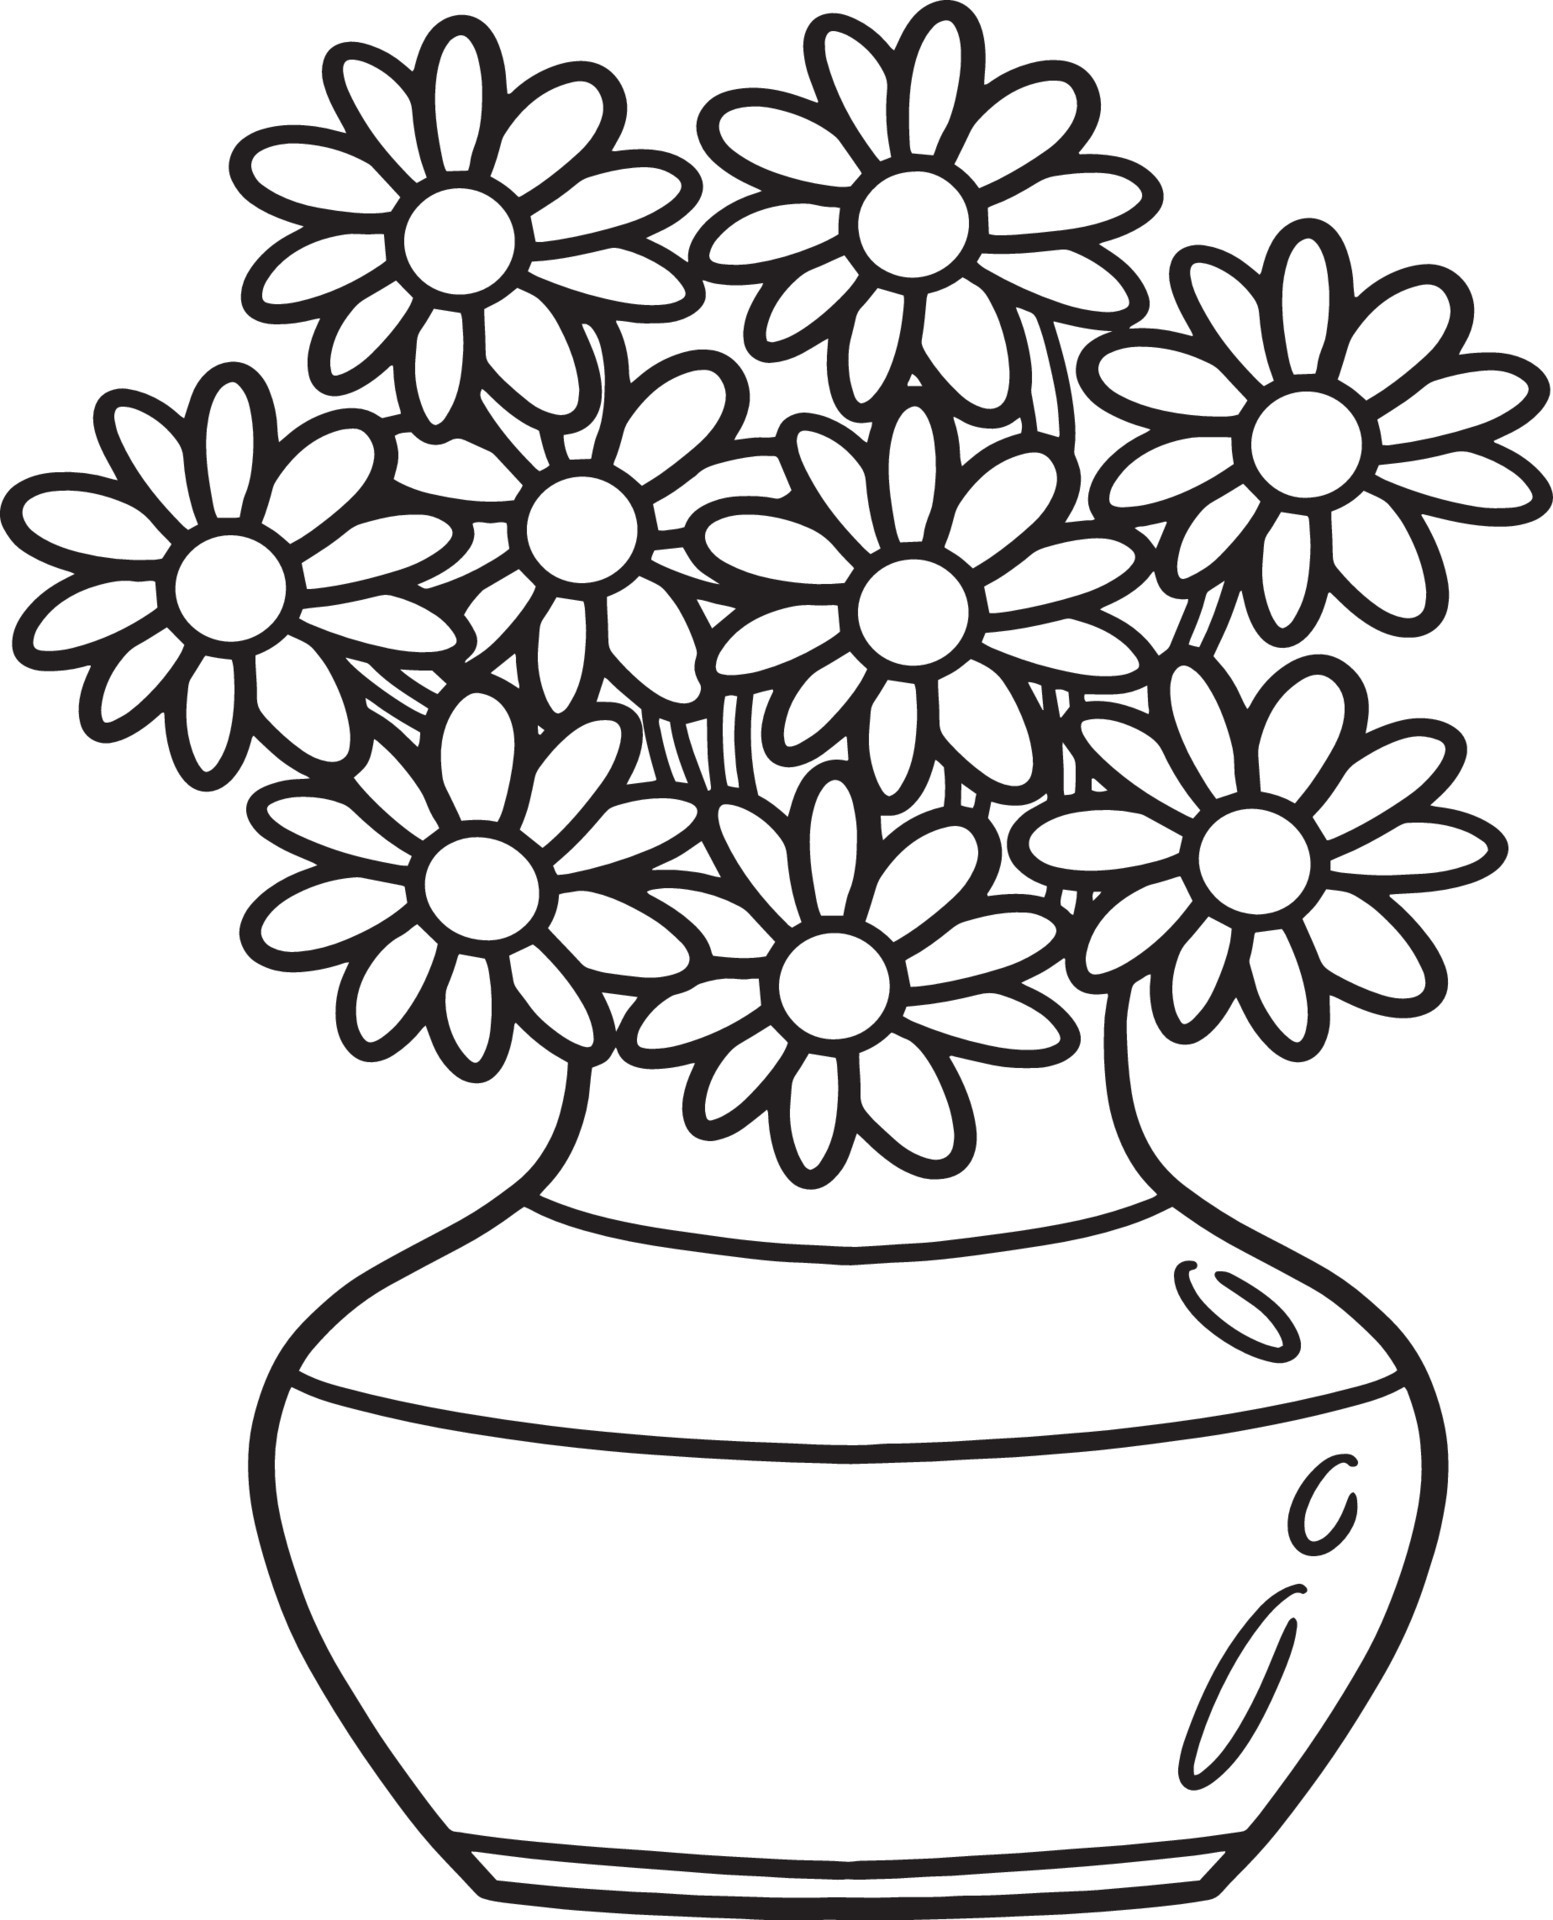 Fun vase with flowers for children aged 8-9